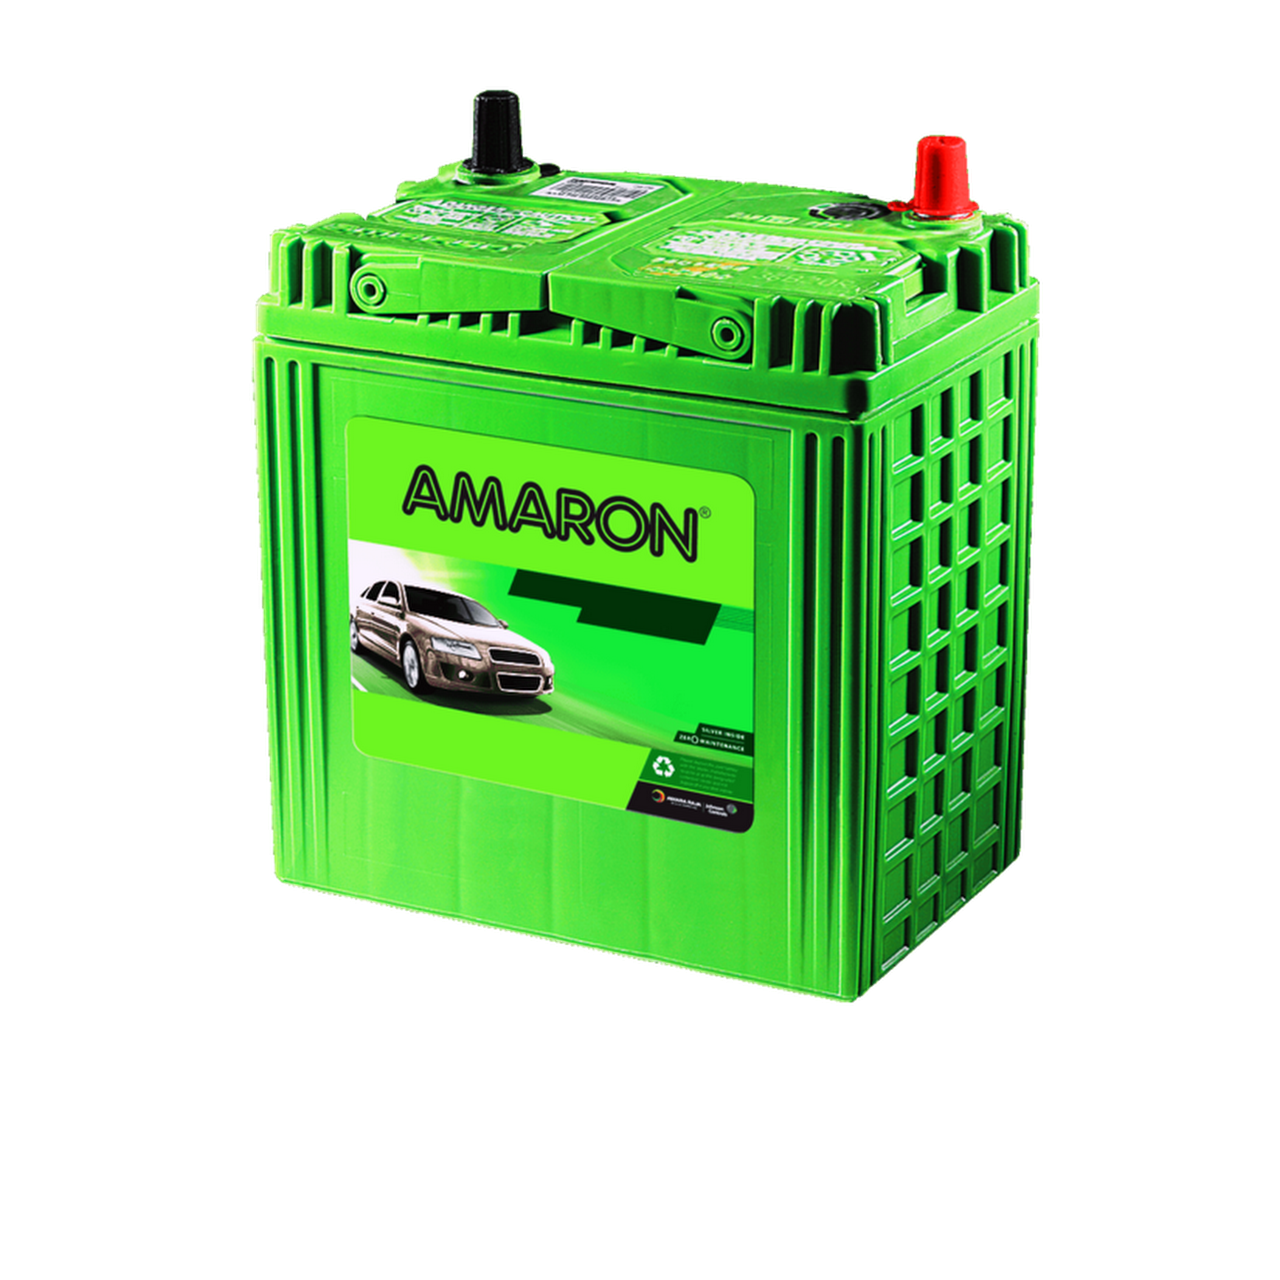 Proton Inspira Amaron Battery Product for quote